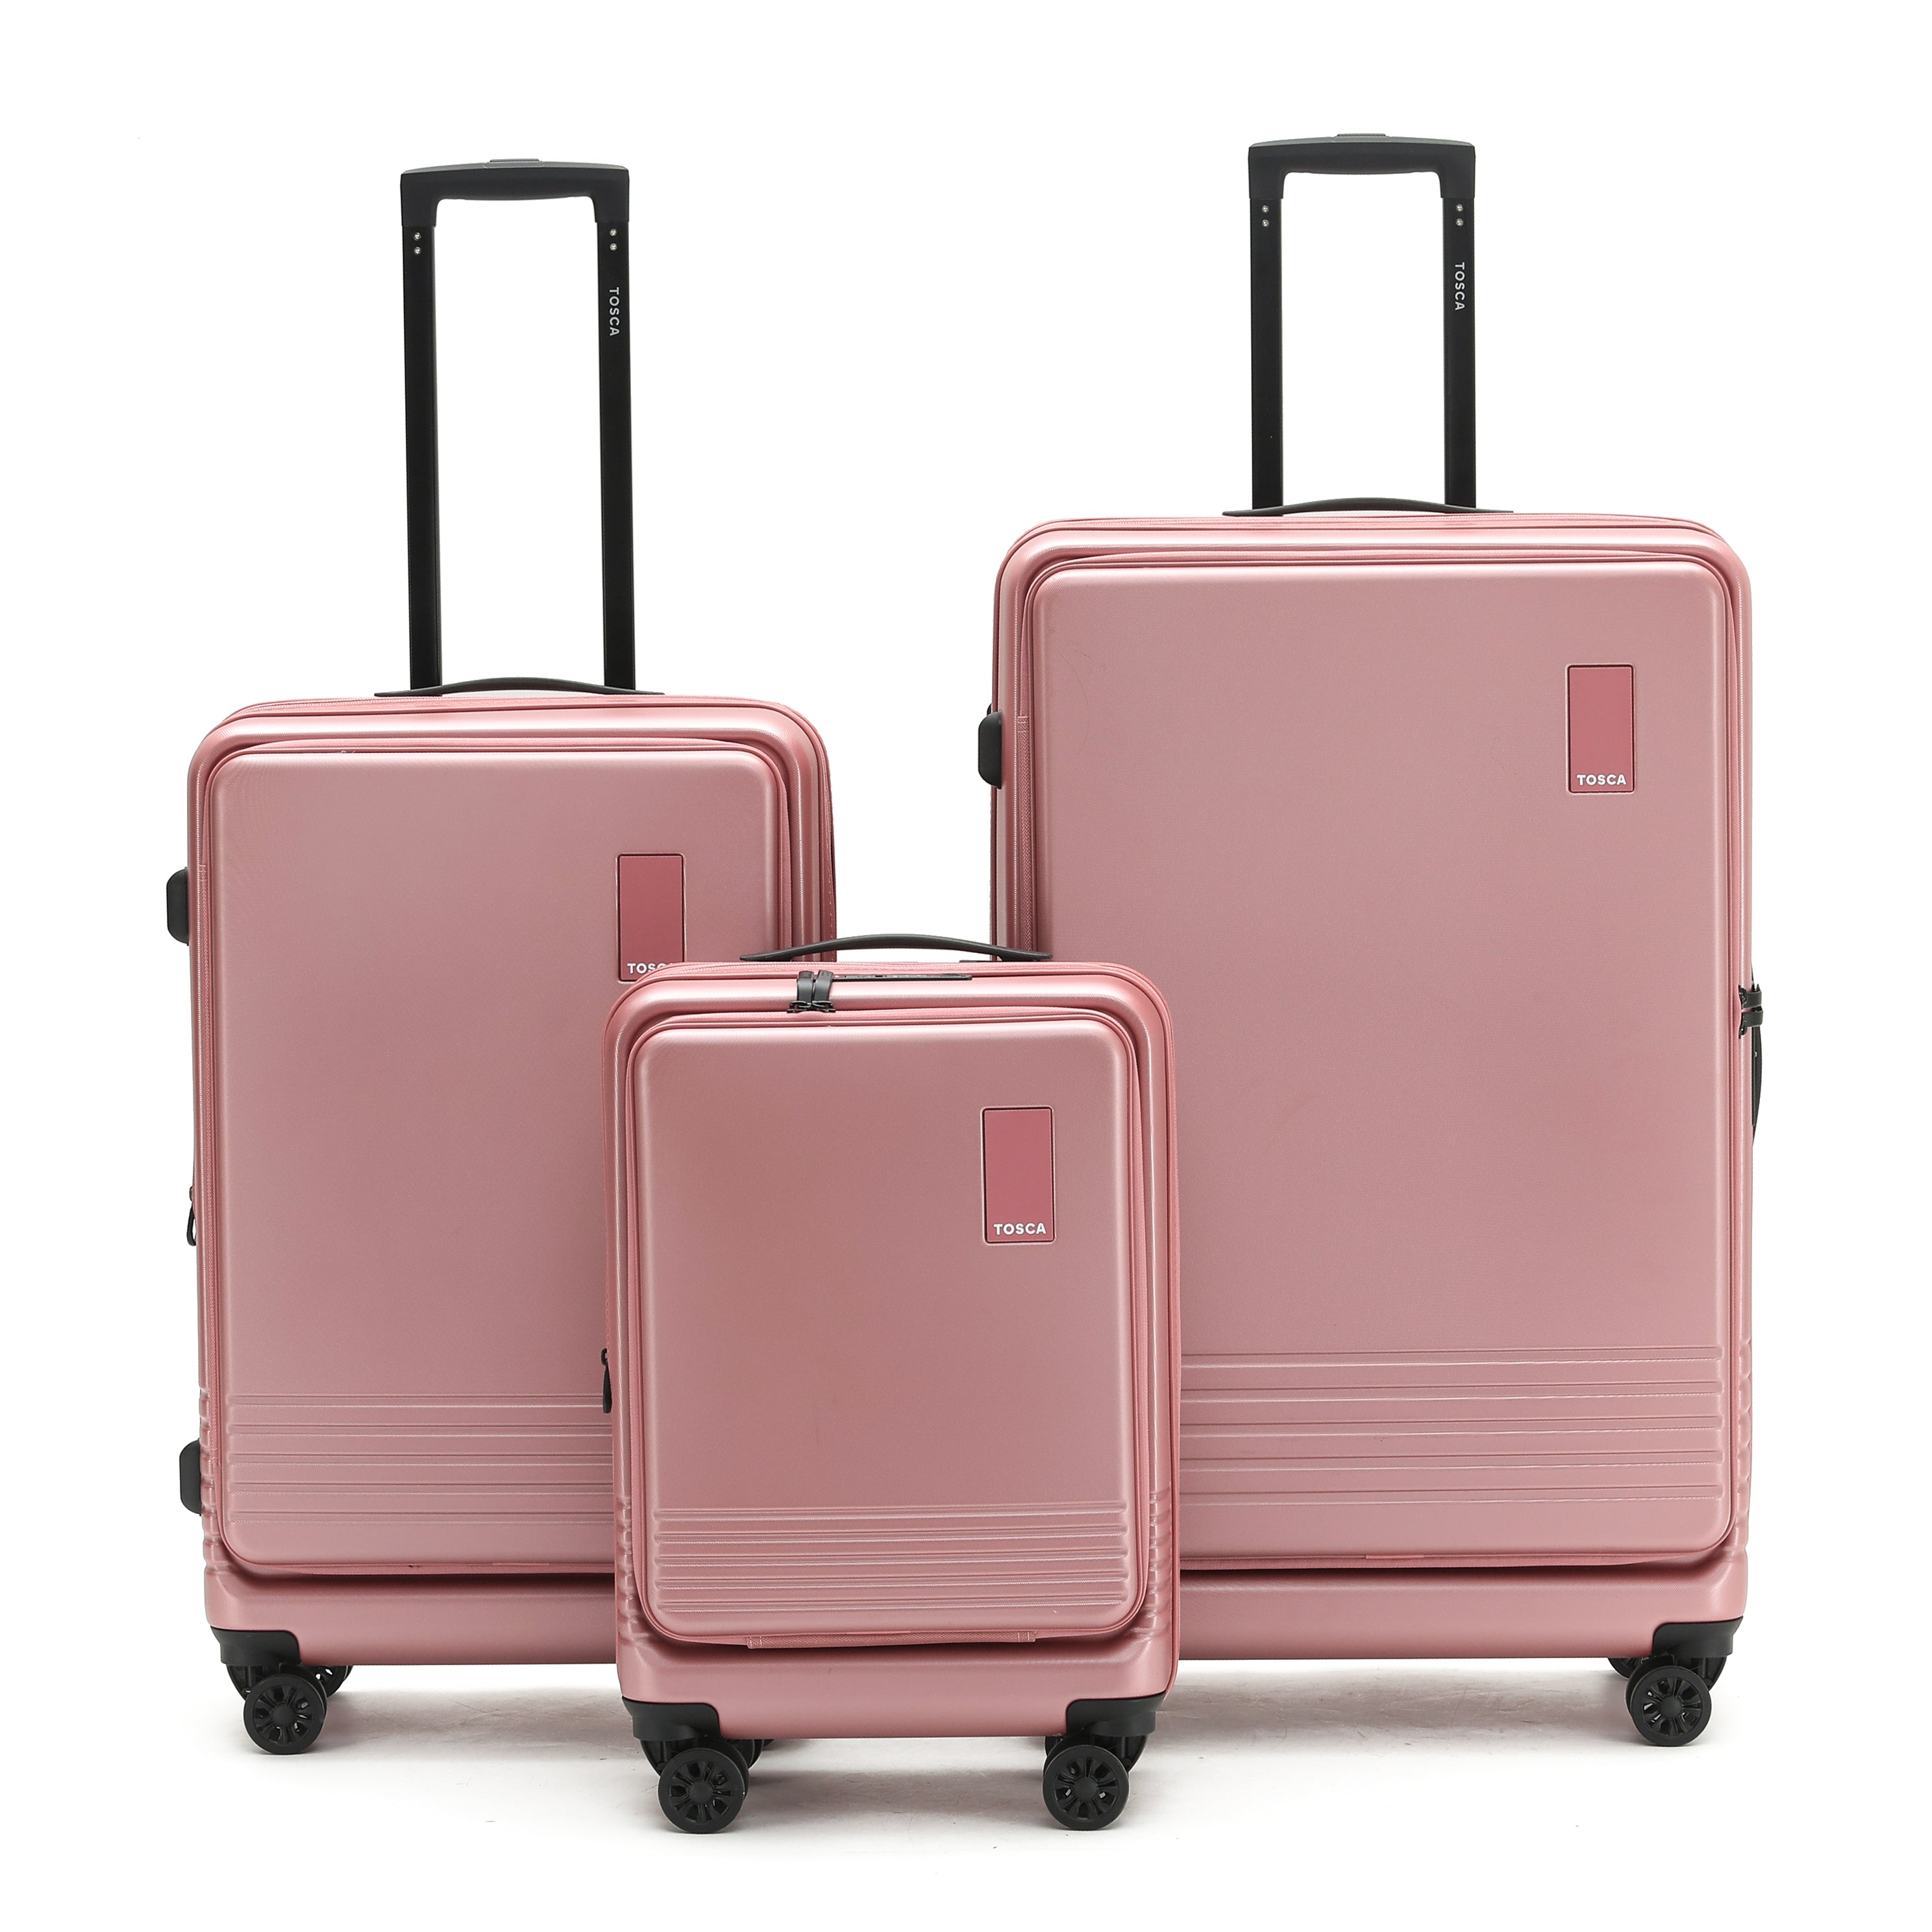 Tosca - TCA644 Horizon Front lid opening Set of 3 suitcases - Dusty Rose